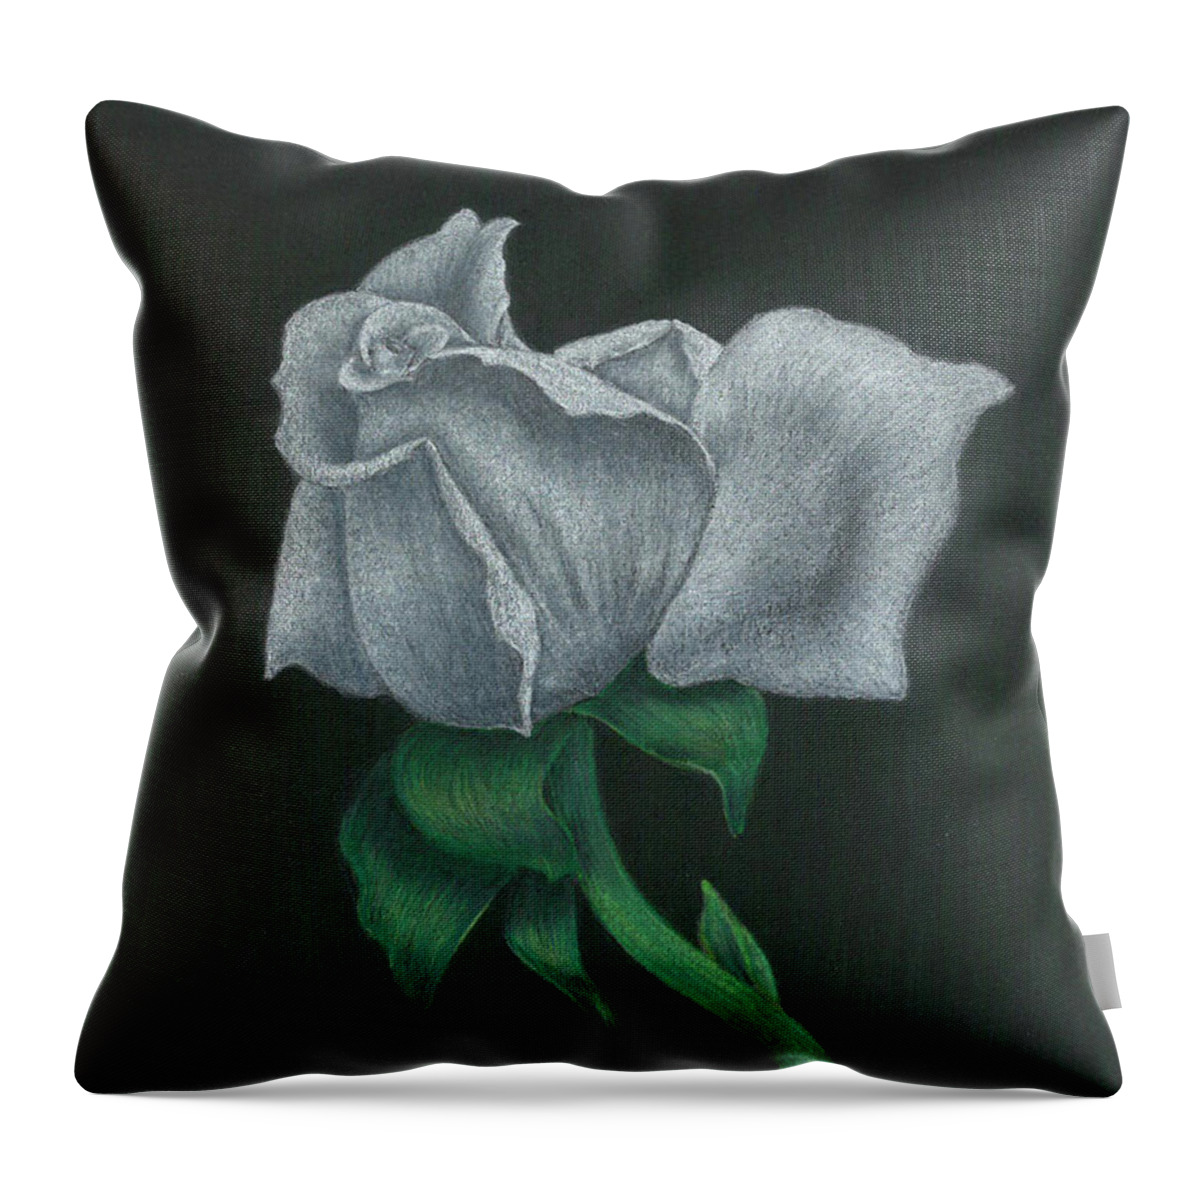 Rose Throw Pillow featuring the drawing White Rose by Troy Levesque